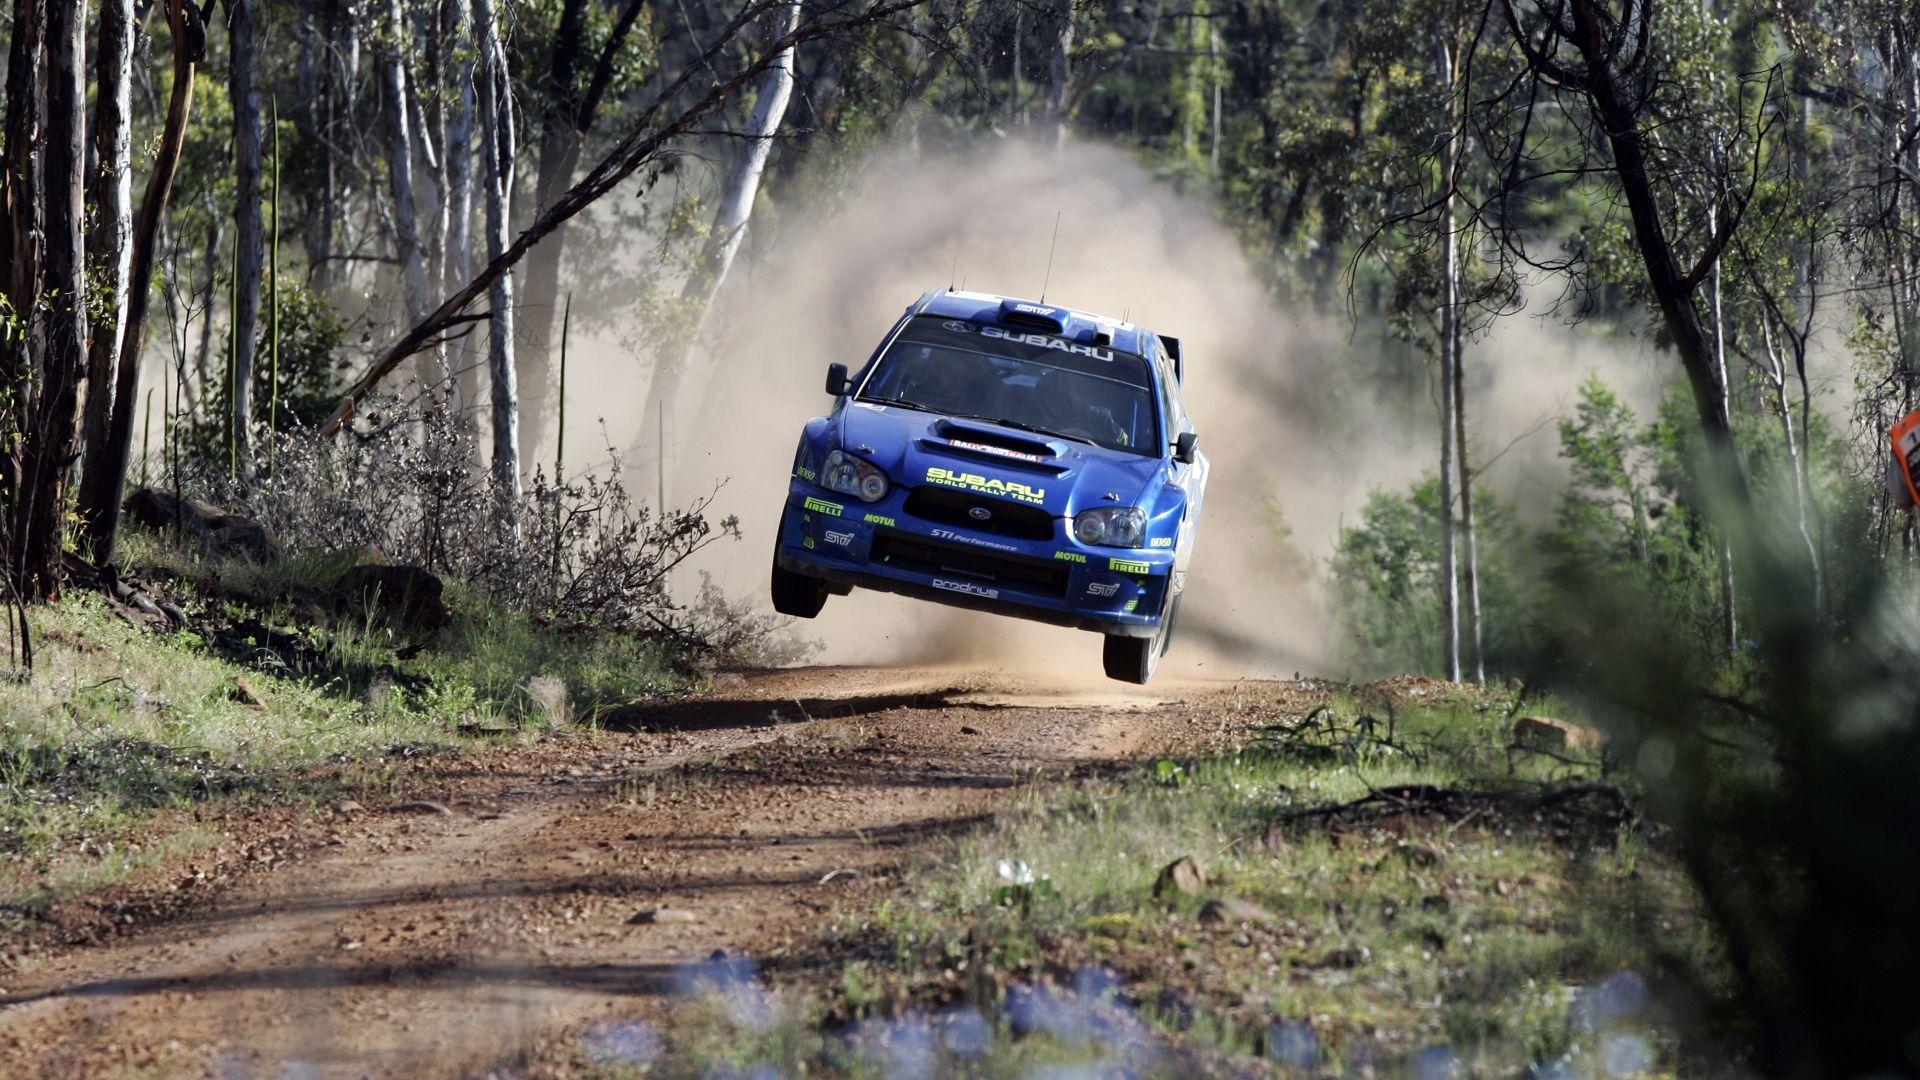 Daily Wallpaper: WRC Subaru Catching Air. I Like To Waste My Time